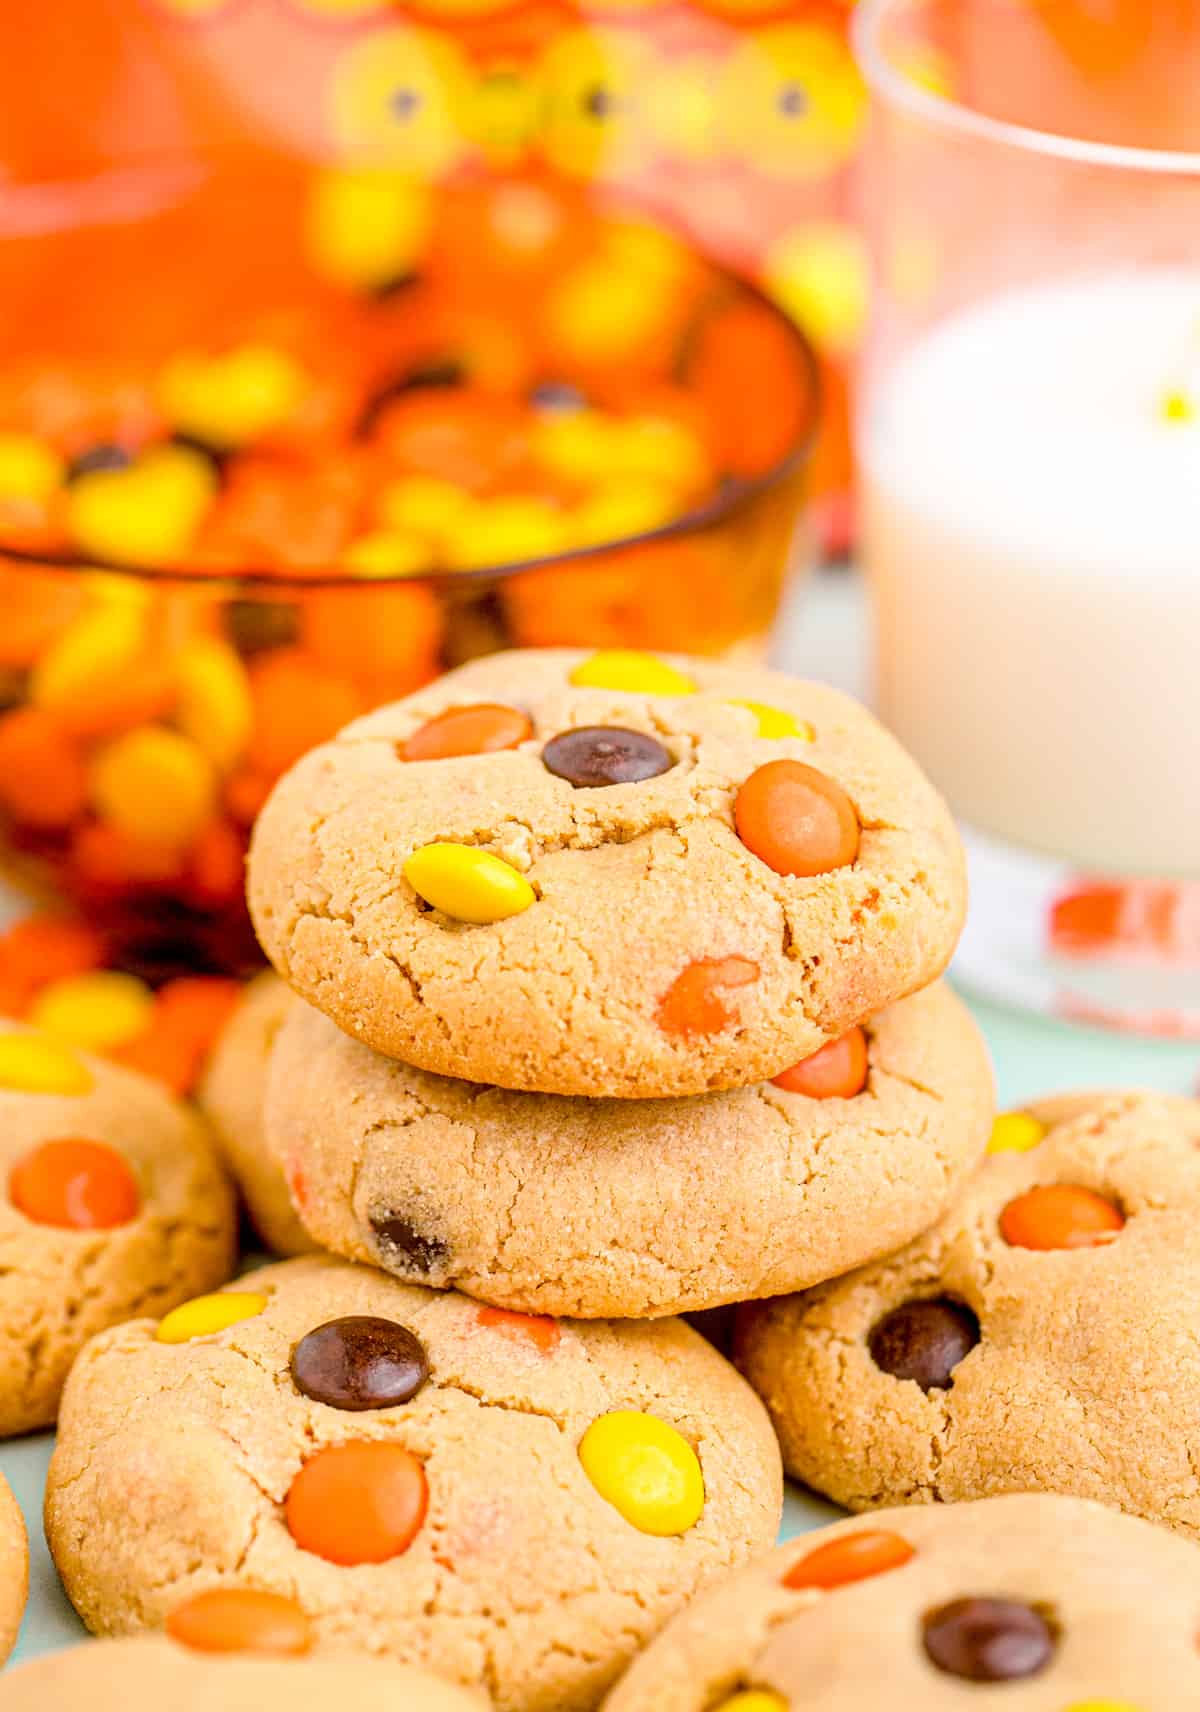 Stacked Reese's Peanut Butter Cookies with Reese's Pieces and milk in background.